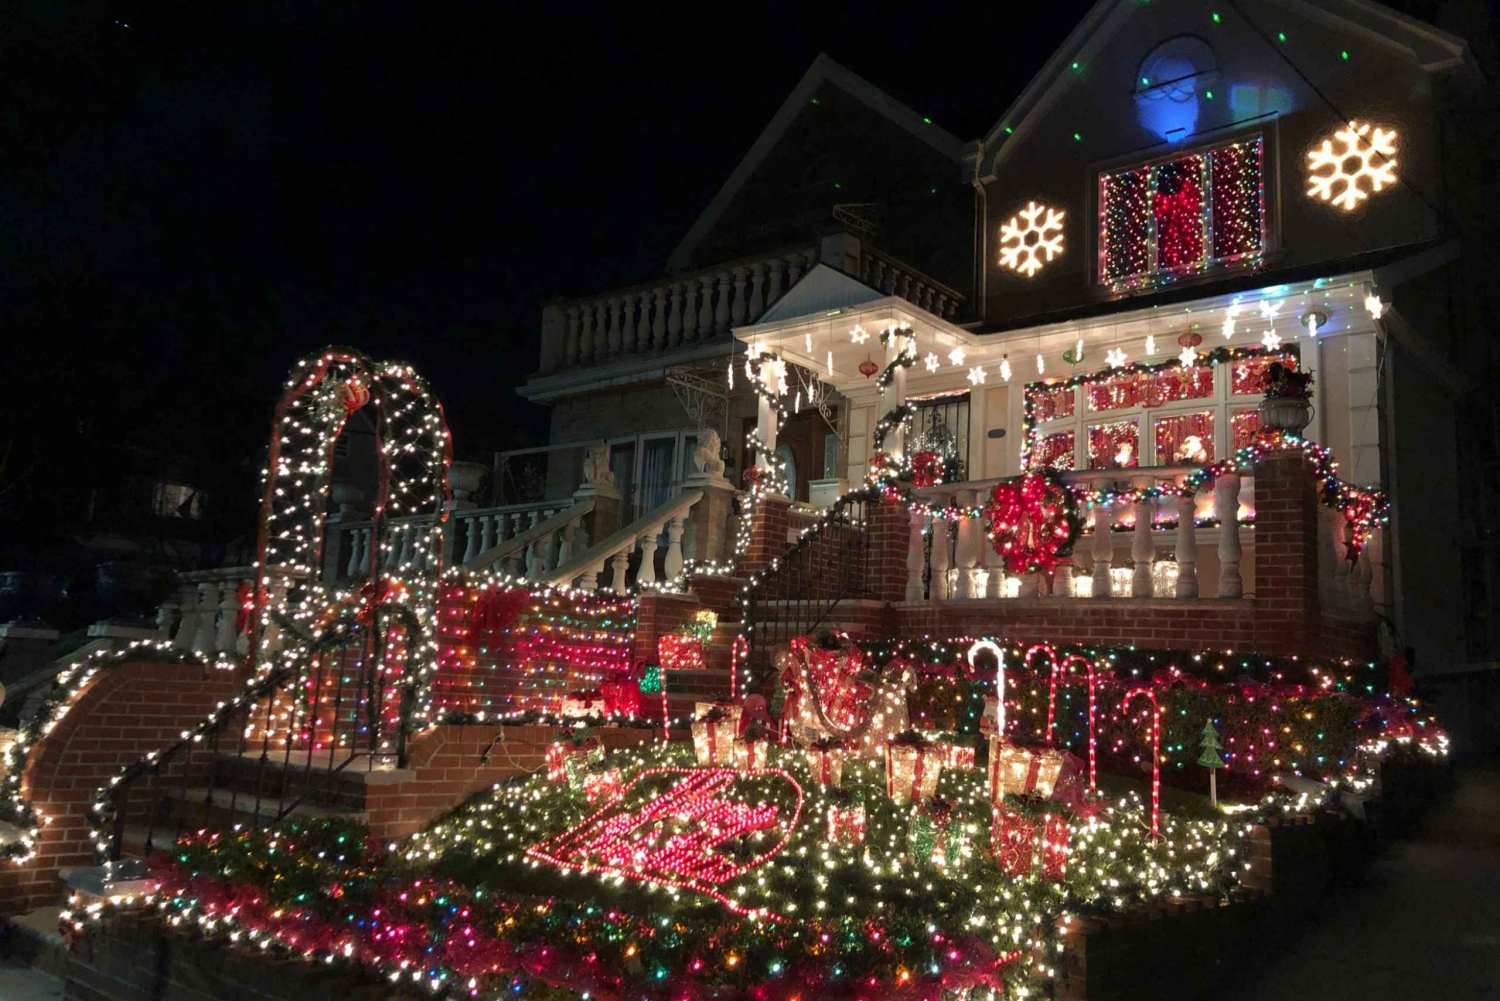 Enjoying-the-Festive-Decorations-at-Dyker-Heights